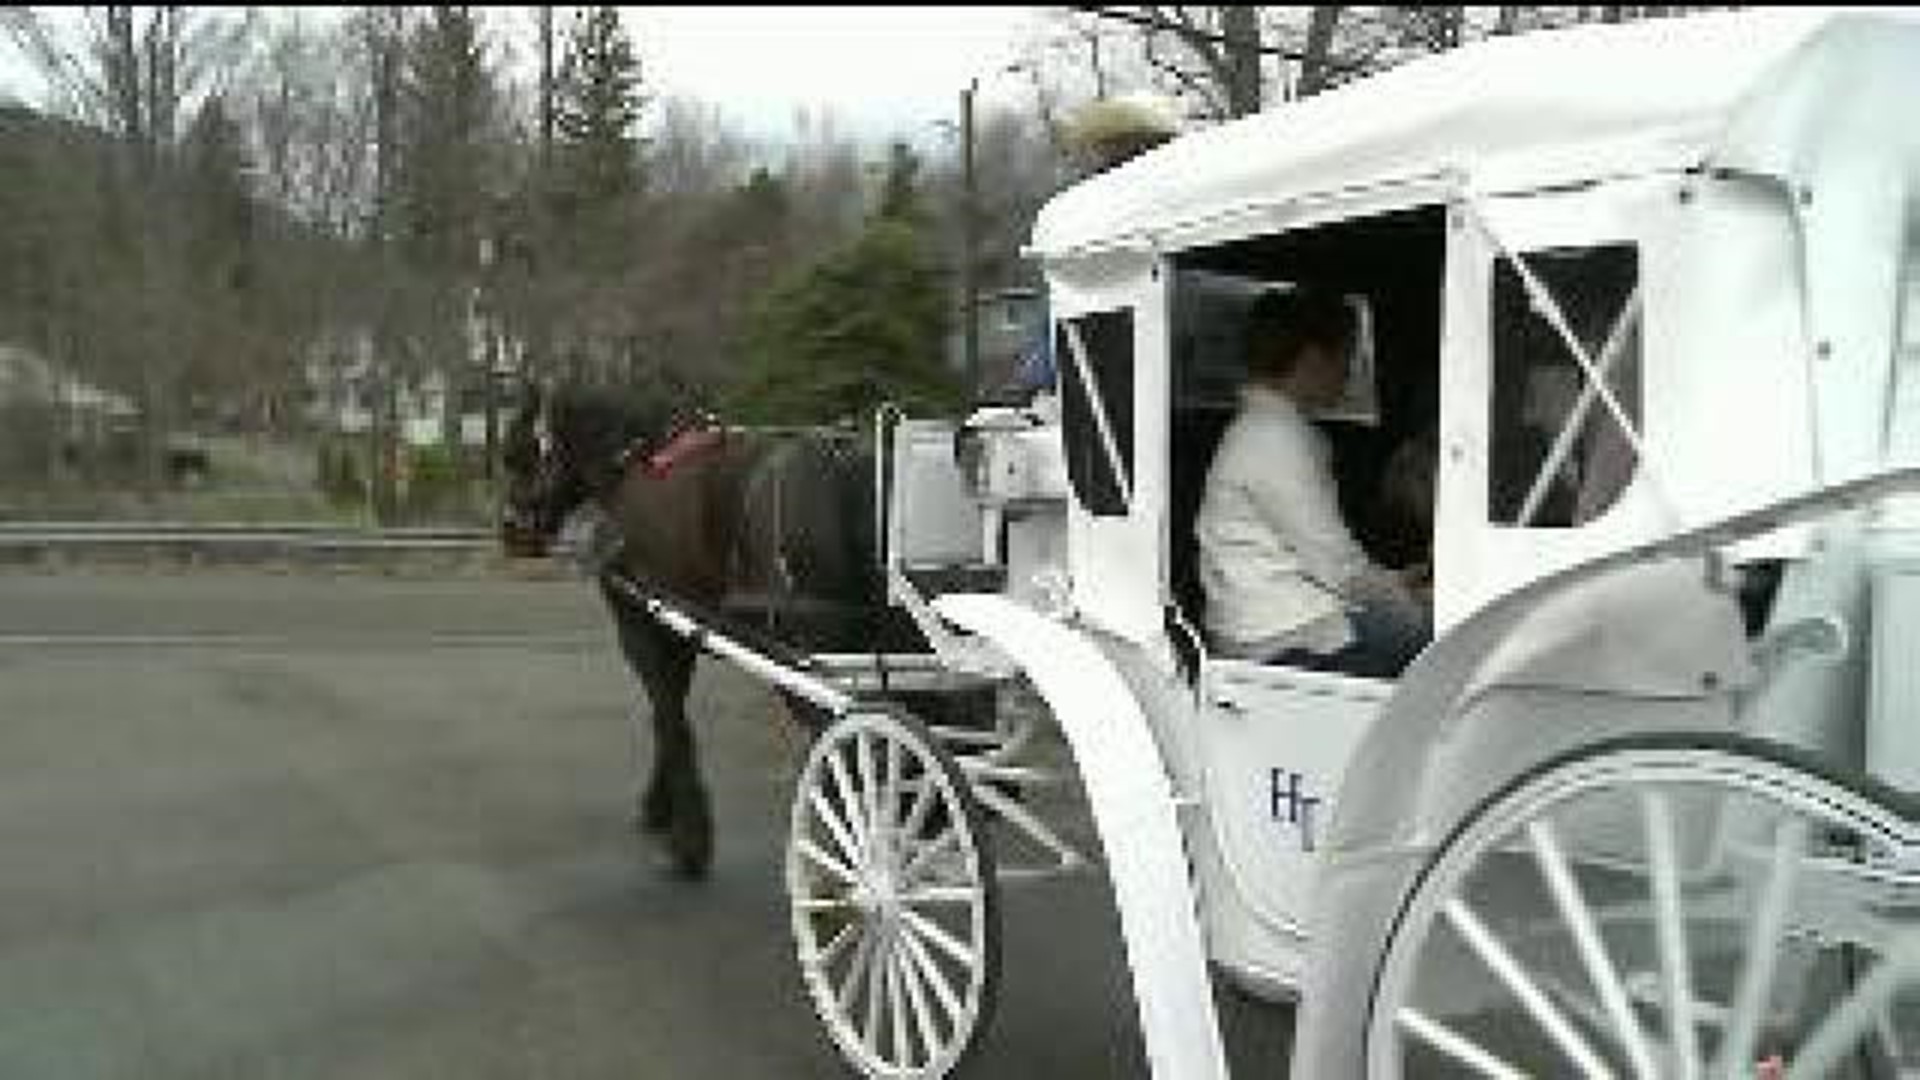 Horse-Drawn Carriage Ban in NYC?